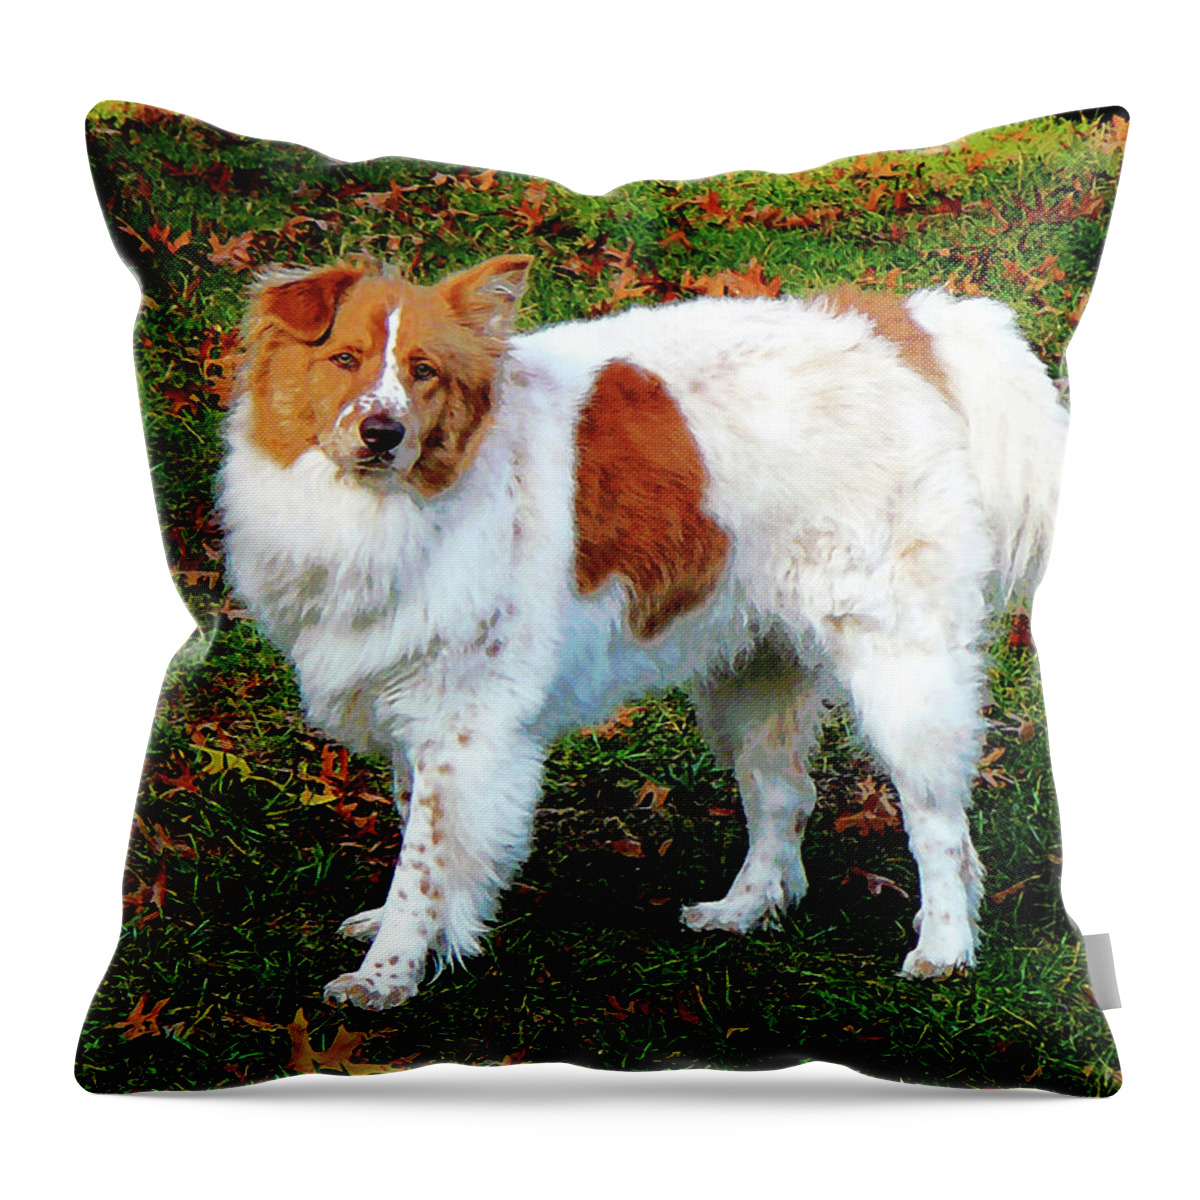 Dog Throw Pillow featuring the photograph Australian Shepherd on Lawn by Susan Savad